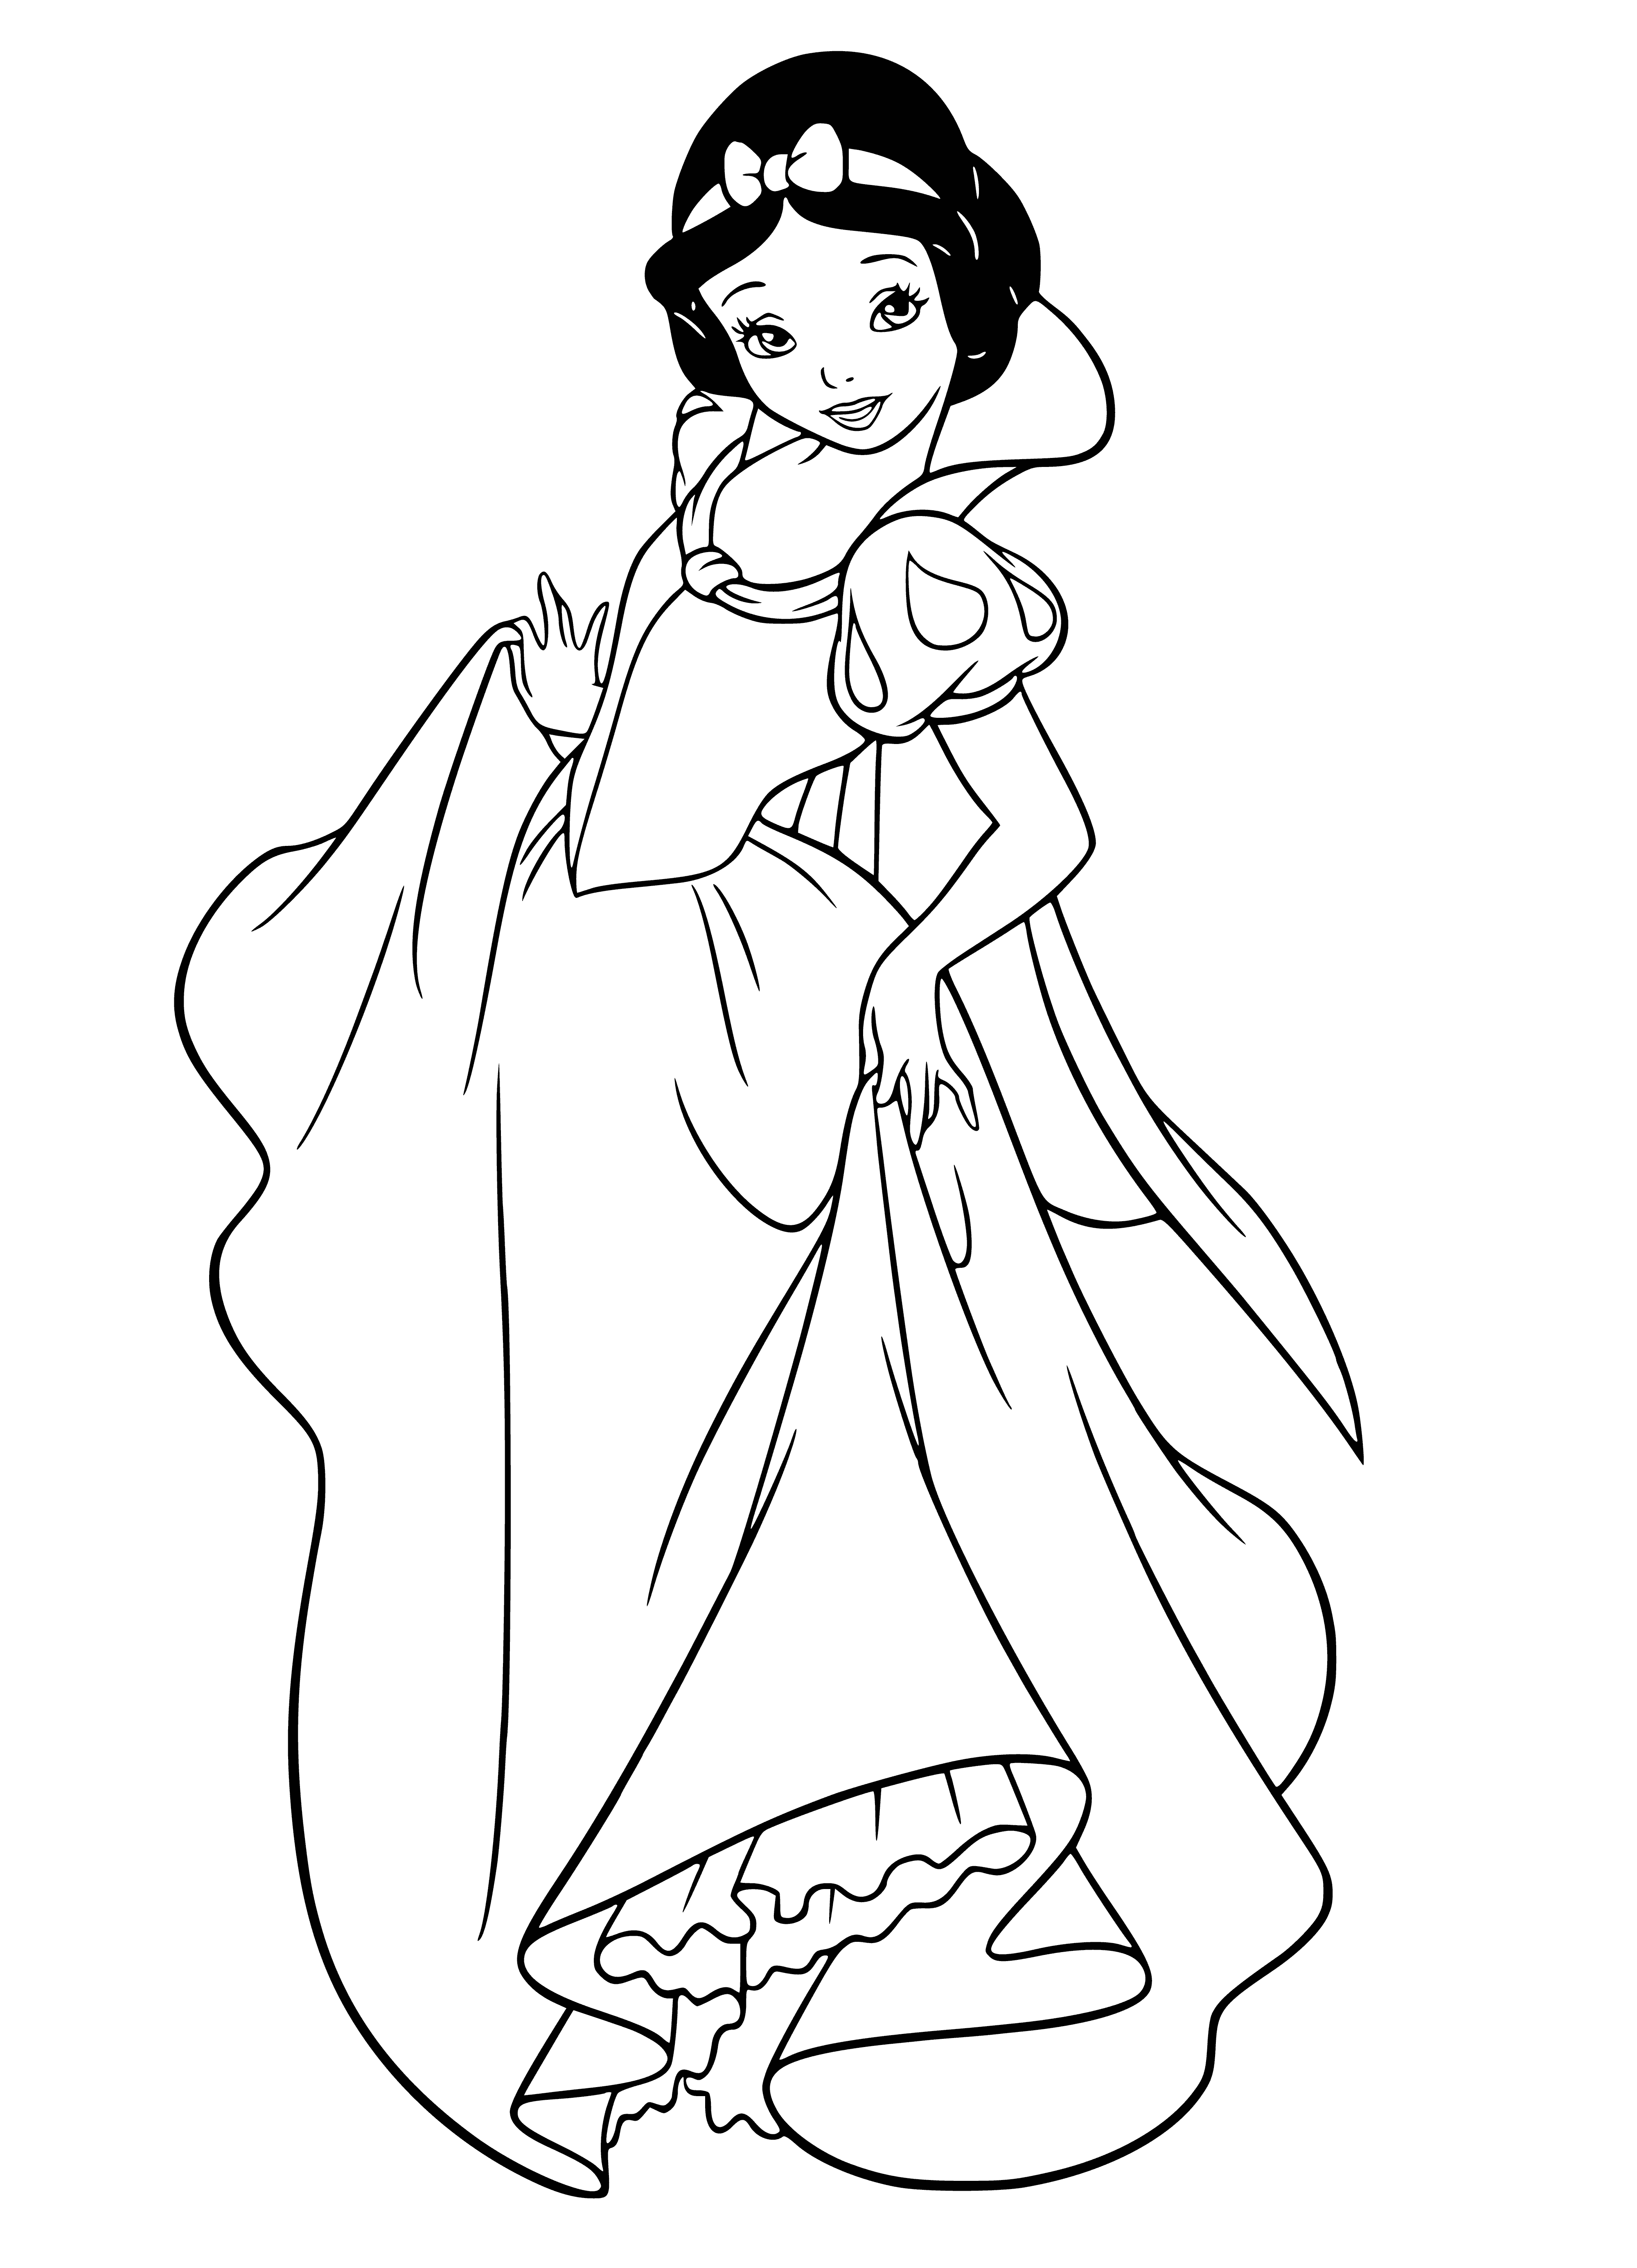 coloring page: Snow White dances gracefully in the center of a cozy cabin, surrounded by seven smiling dwarfs. Fire crackles in the fireplace, and there are homey touches such as braided rugs and comfortable chairs.